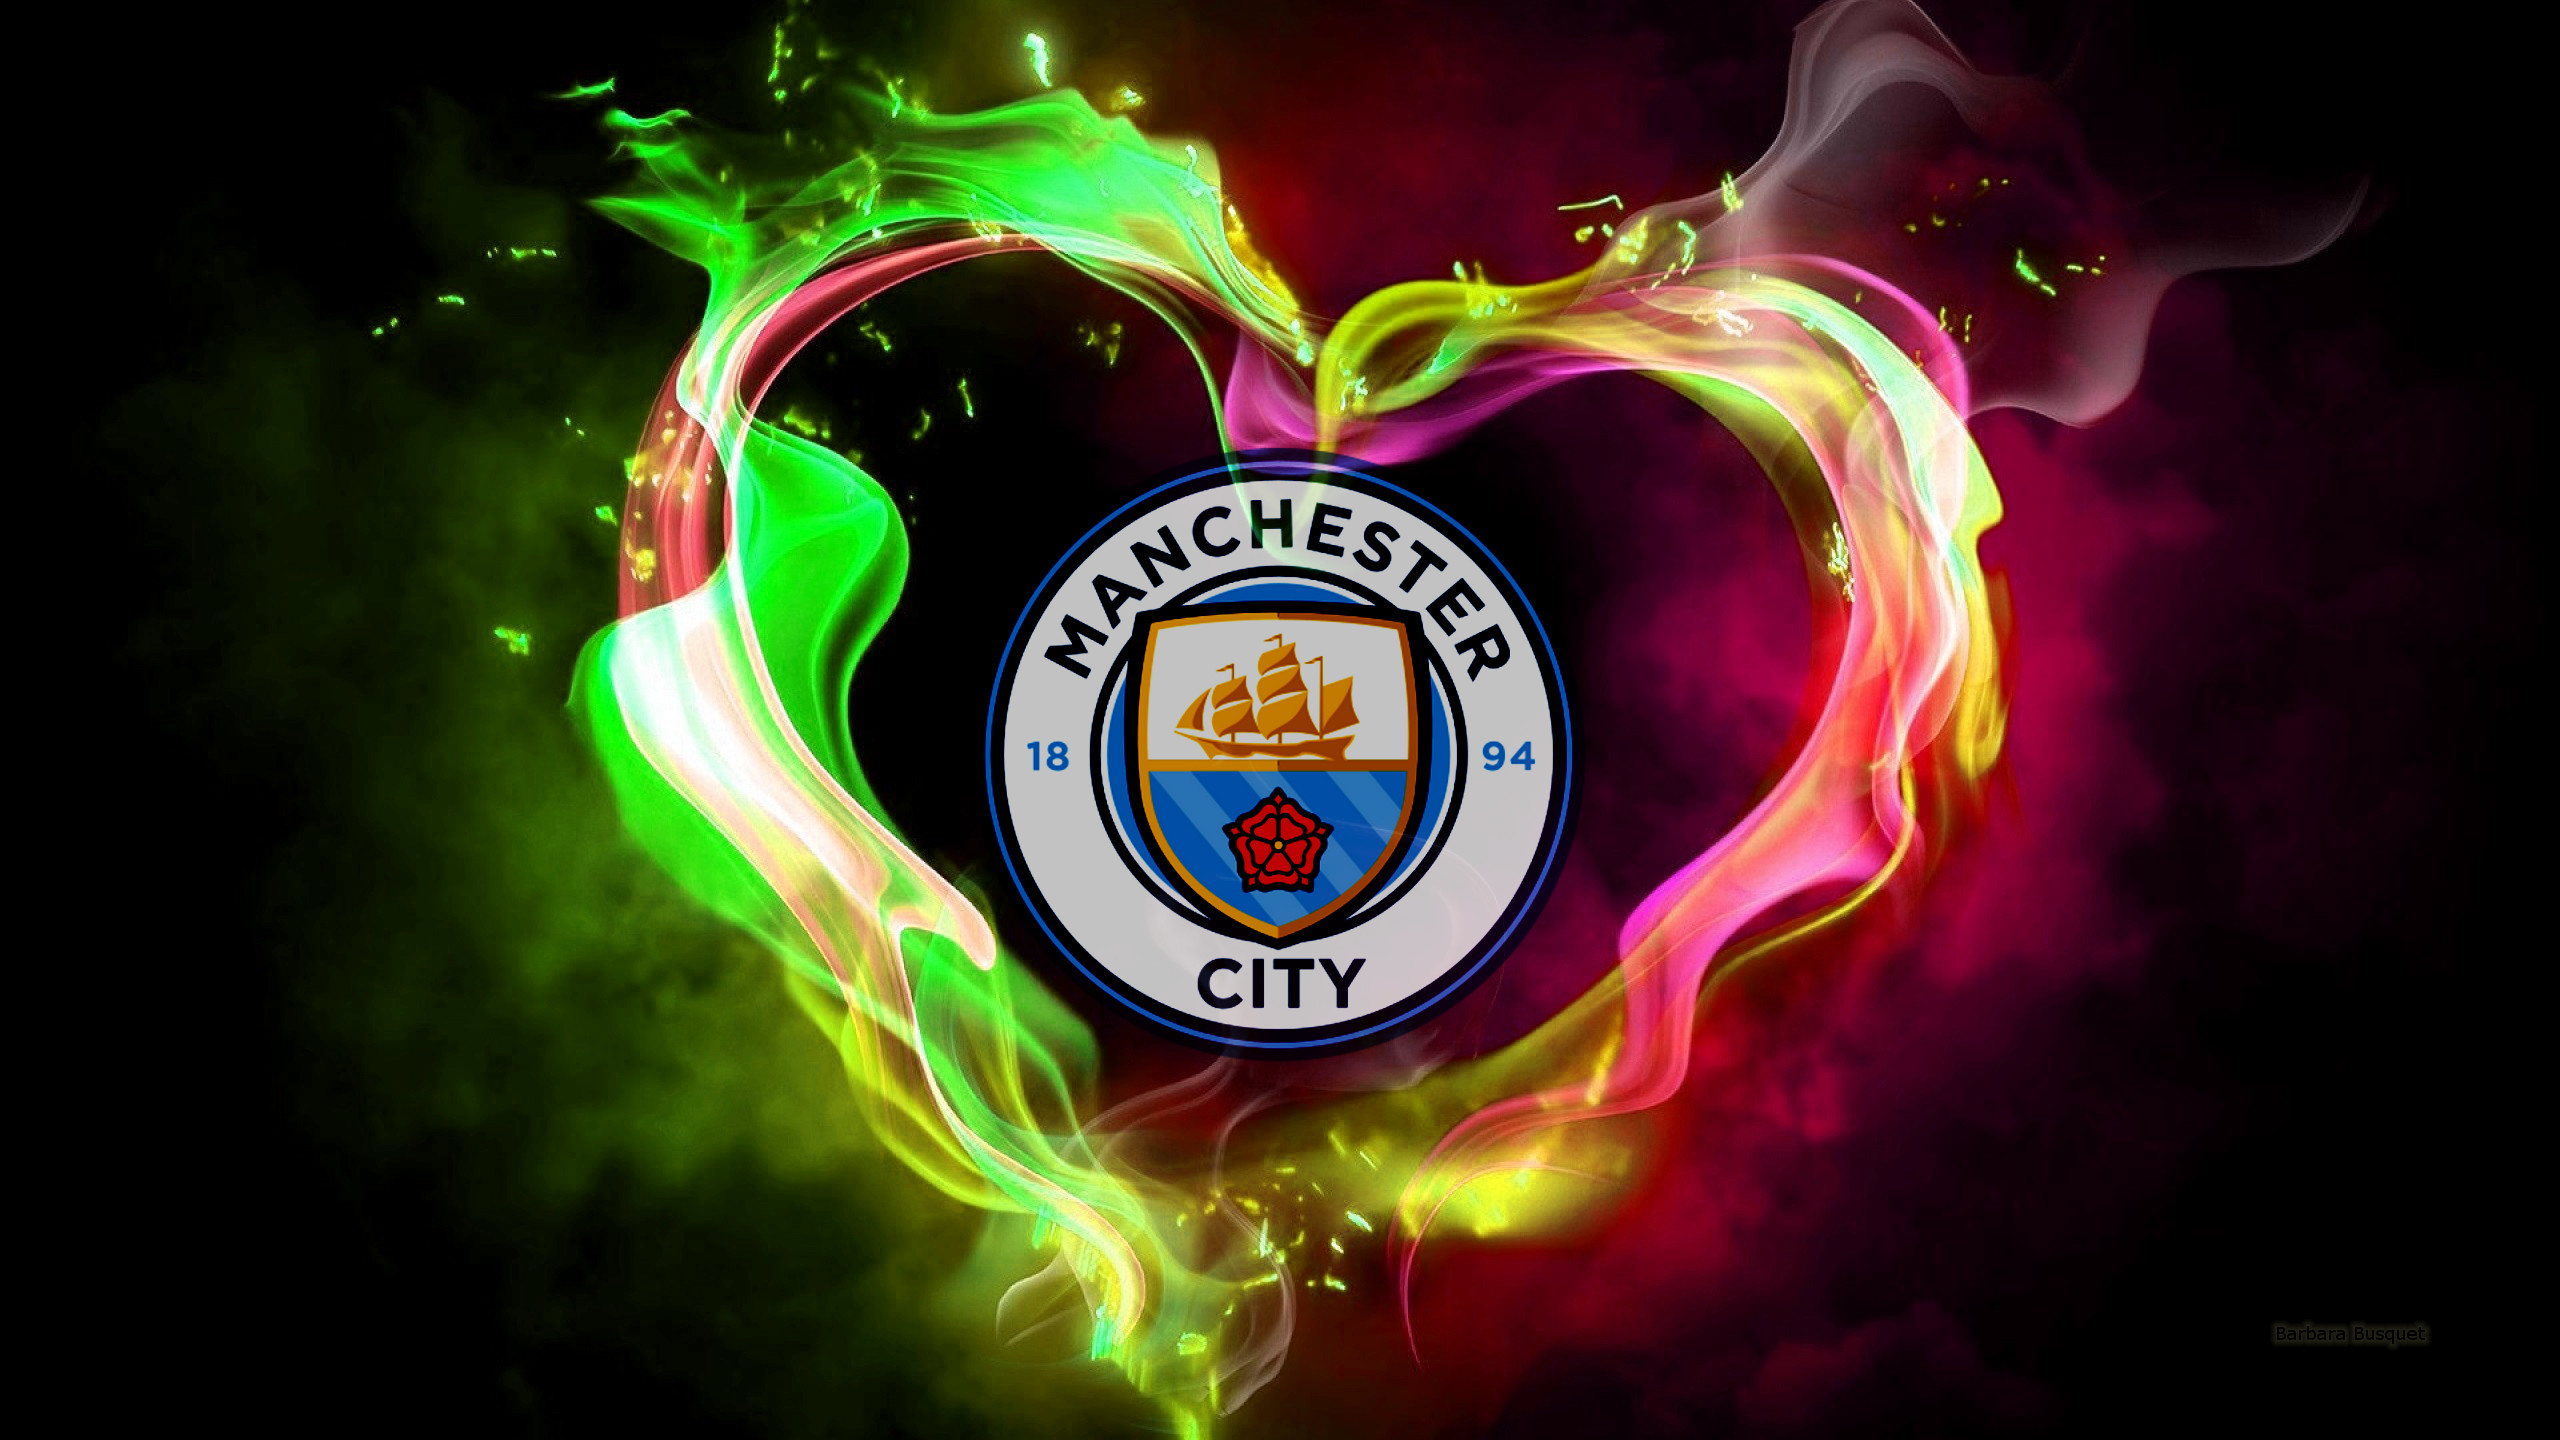 Free download Manchester City FC HD Wallpaper Background Image 2560x1440 [2560x1440] for your Desktop, Mobile & Tablet. Explore Manchester City Logos Wallpaper. Manchester City Background, Manchester City Wallpaper